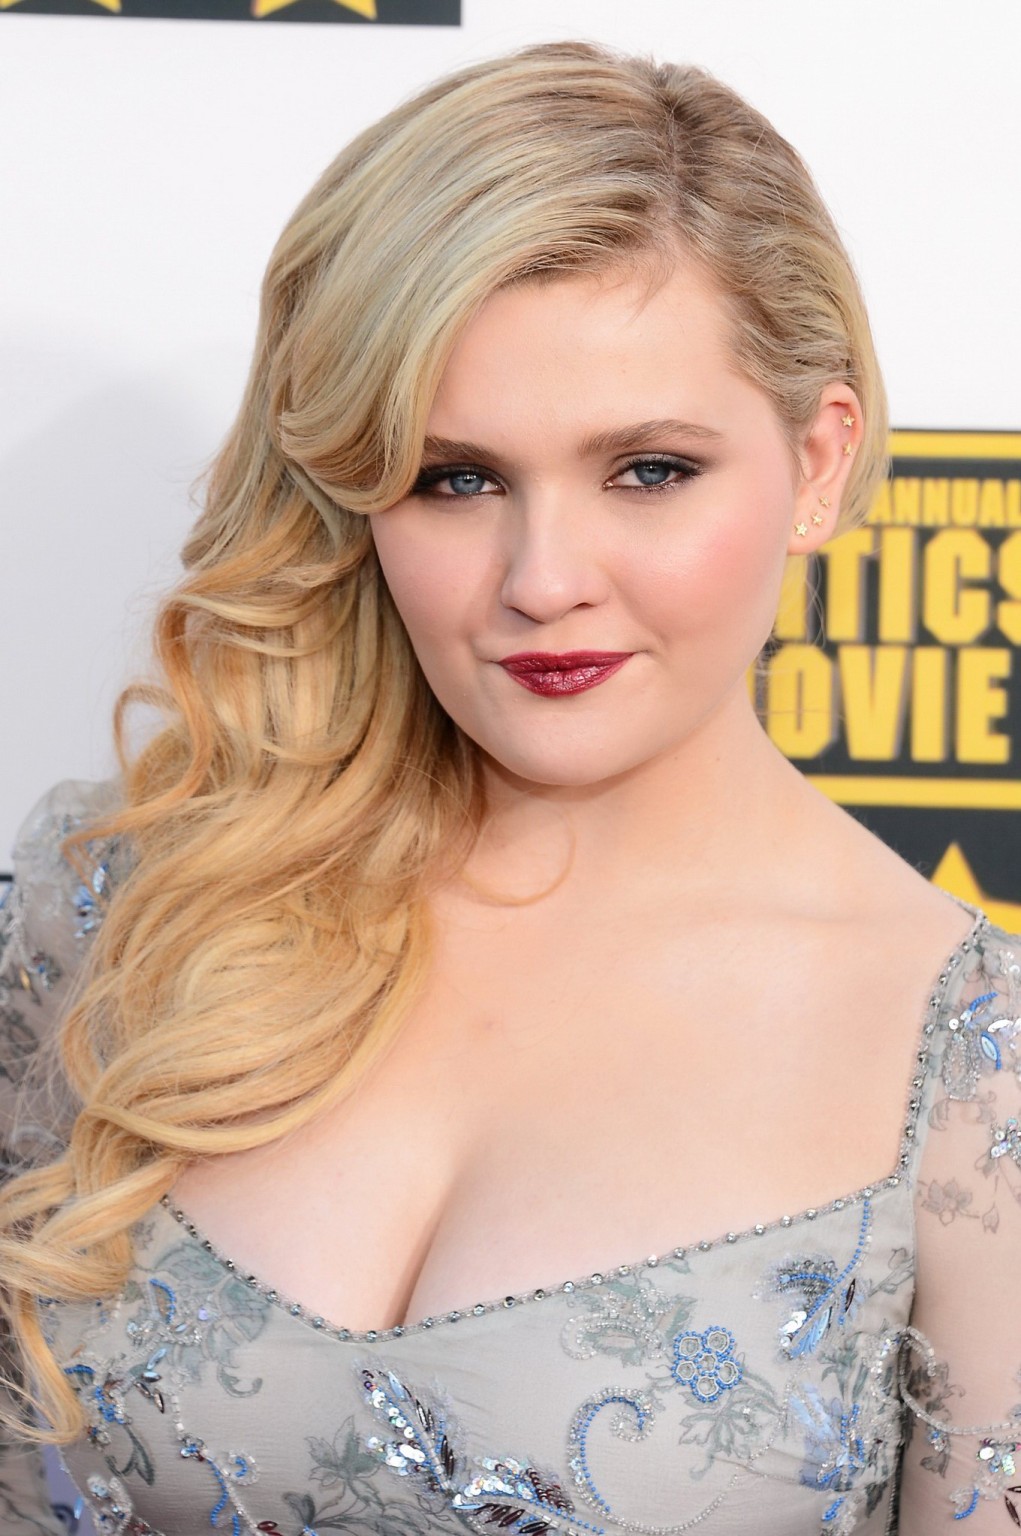 Abigail Breslin showing huge cleavage in a partially see-through lace dress at 1 #75206959